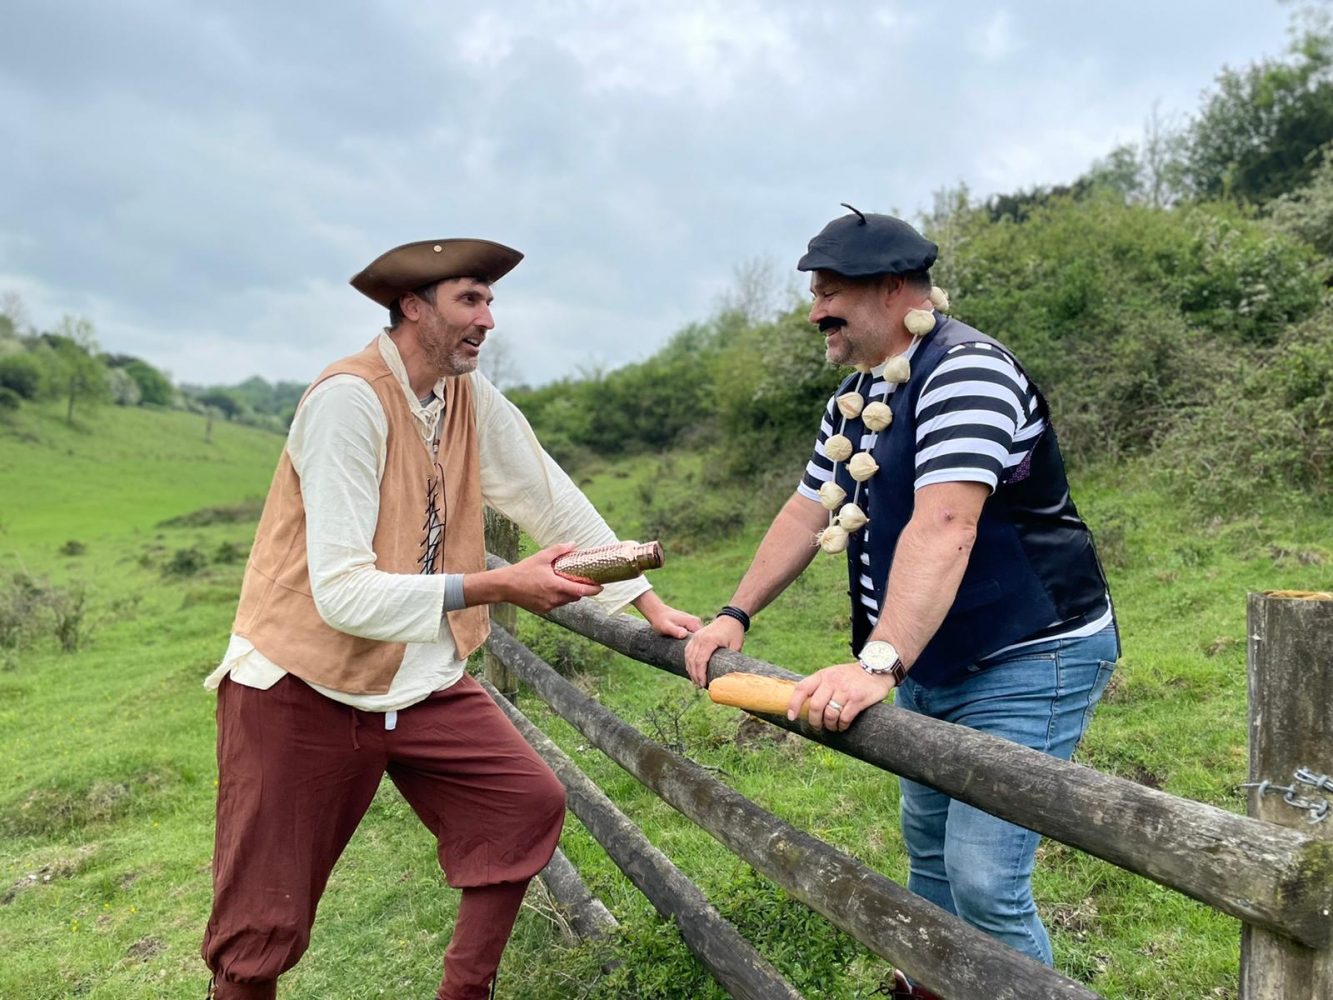 Two men chatting in a field over a fence